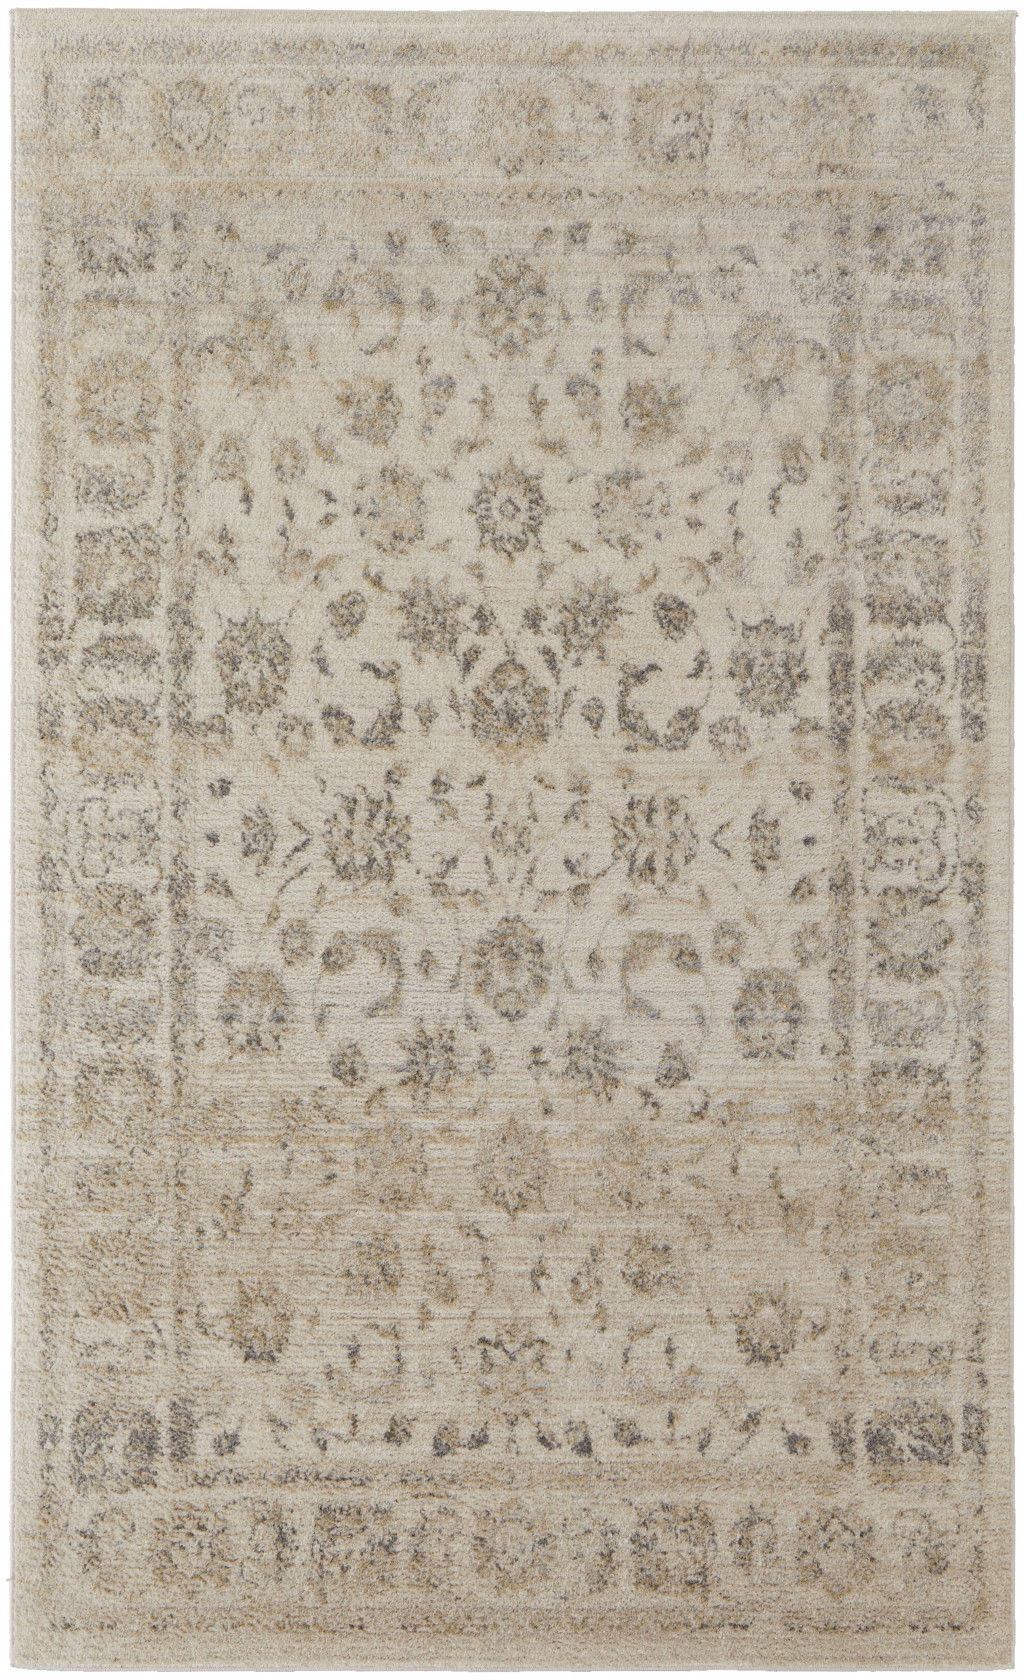 Abstract Power Loom Distressed Area Rug - Ivory Beige And Gray - 8' X 10'